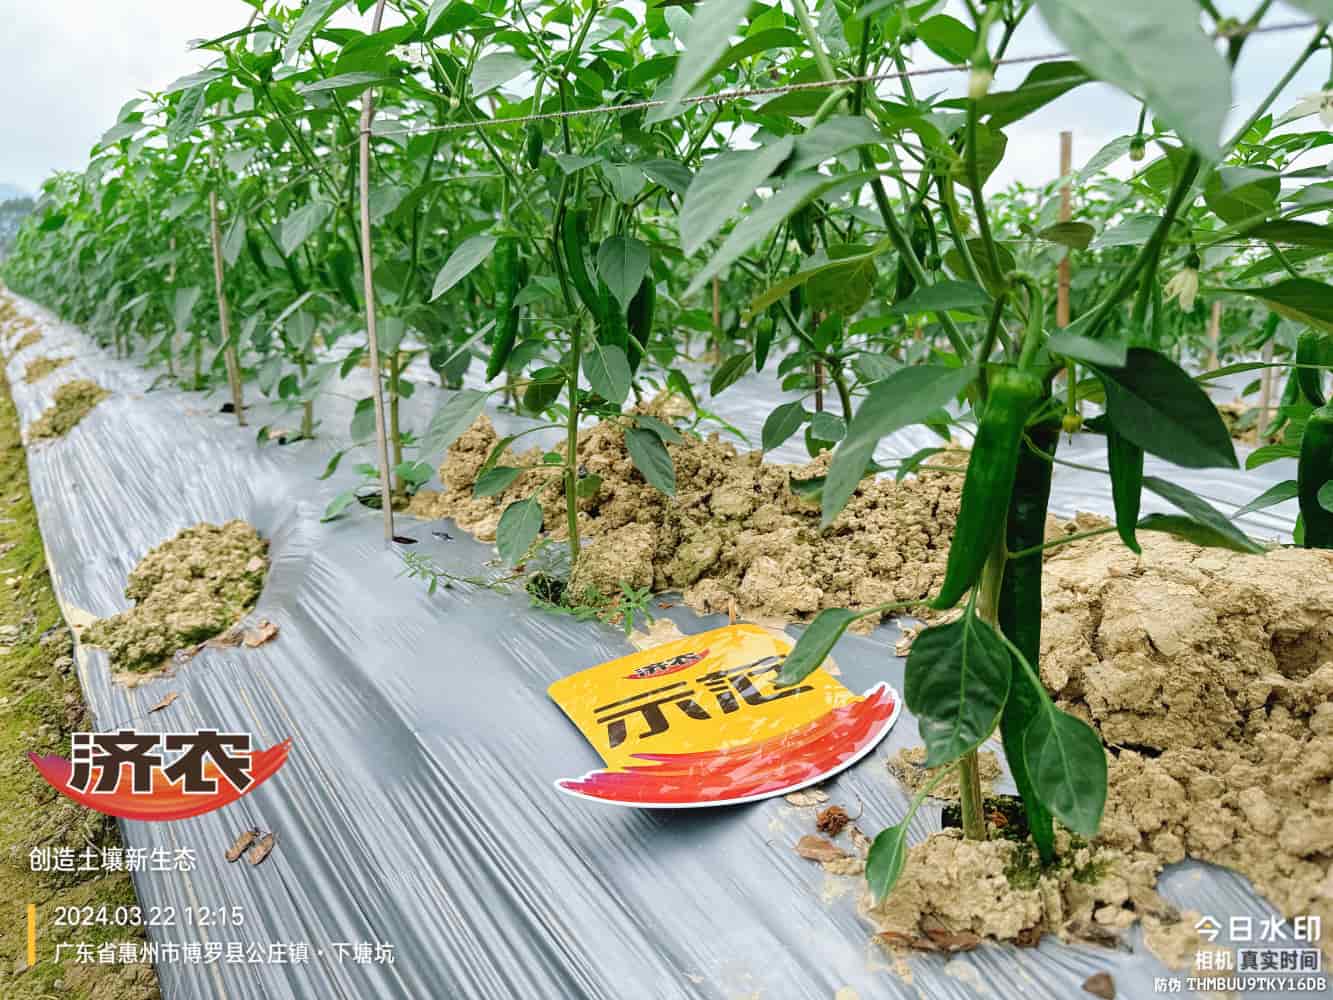 The effect of using agricultural products in Guangdong chili peppers(图1)